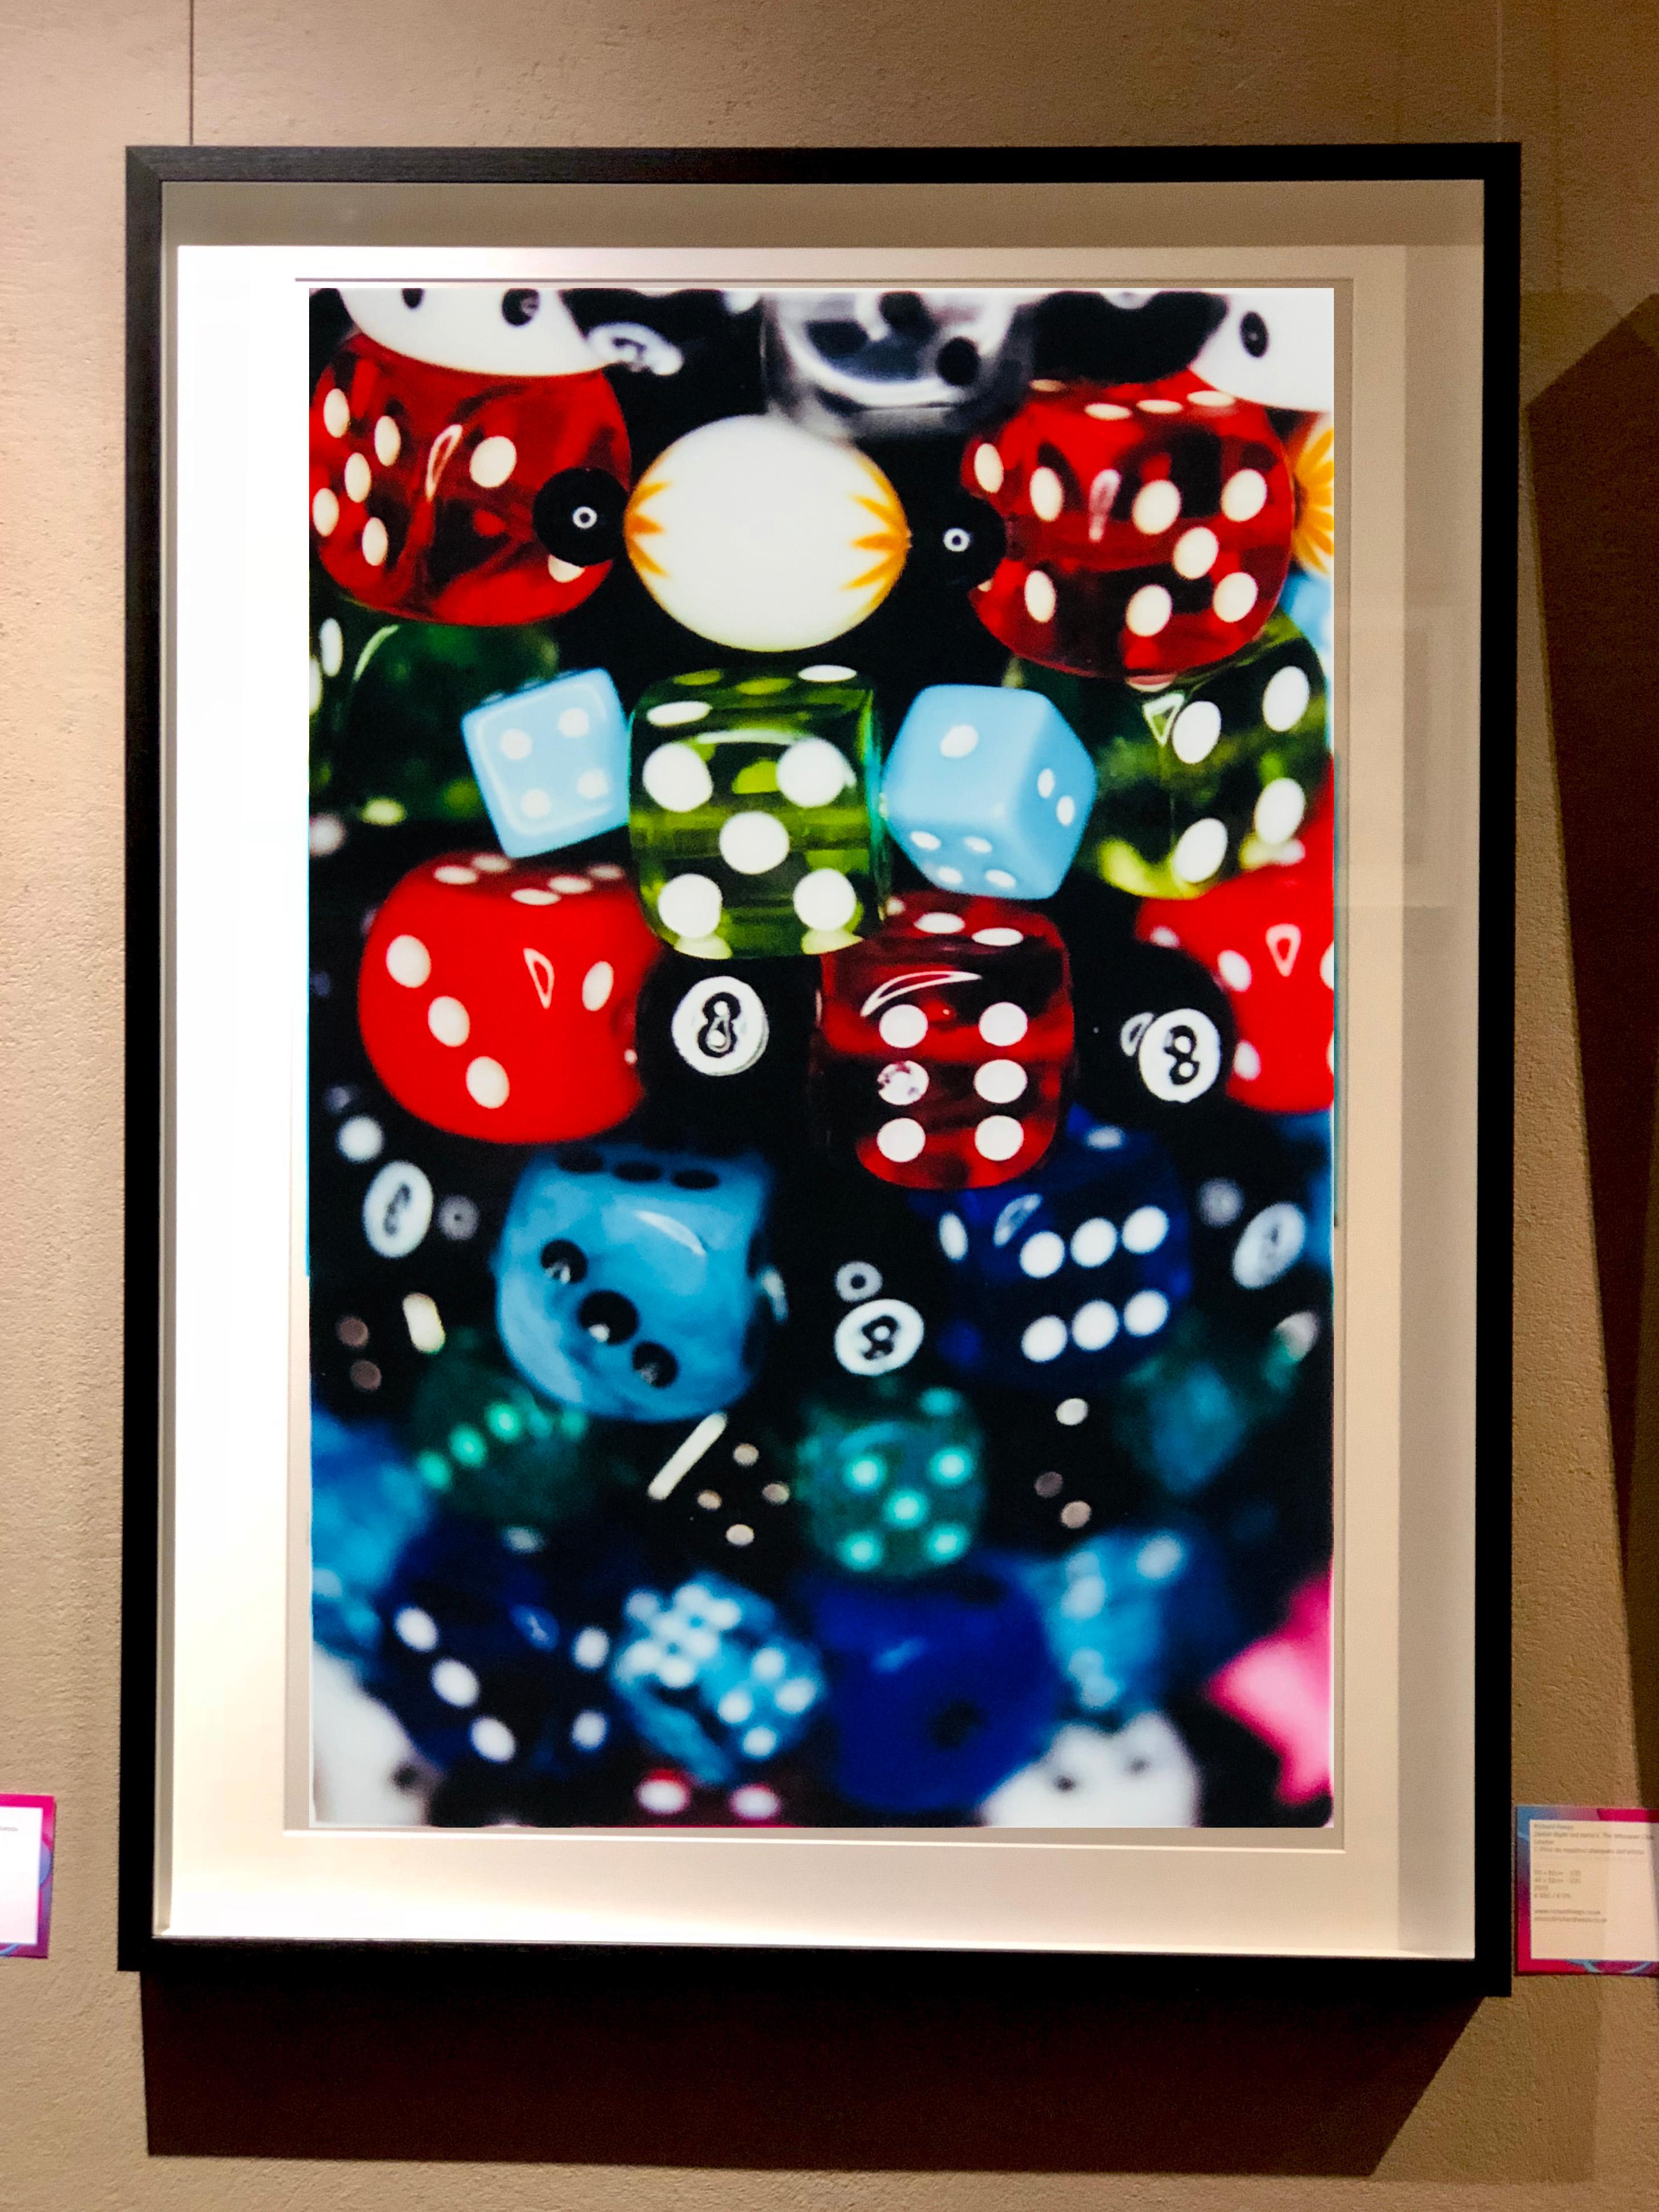 'Dice', Part of Richard Heeps 'Man's Ruin' Series, the vivid detail of the dice in fun multi-colour picture and lucky number 8 ball. Hand-printed by the artist from negative in his Cambridge darkroom.

This artwork is a limited edition of 25 gloss